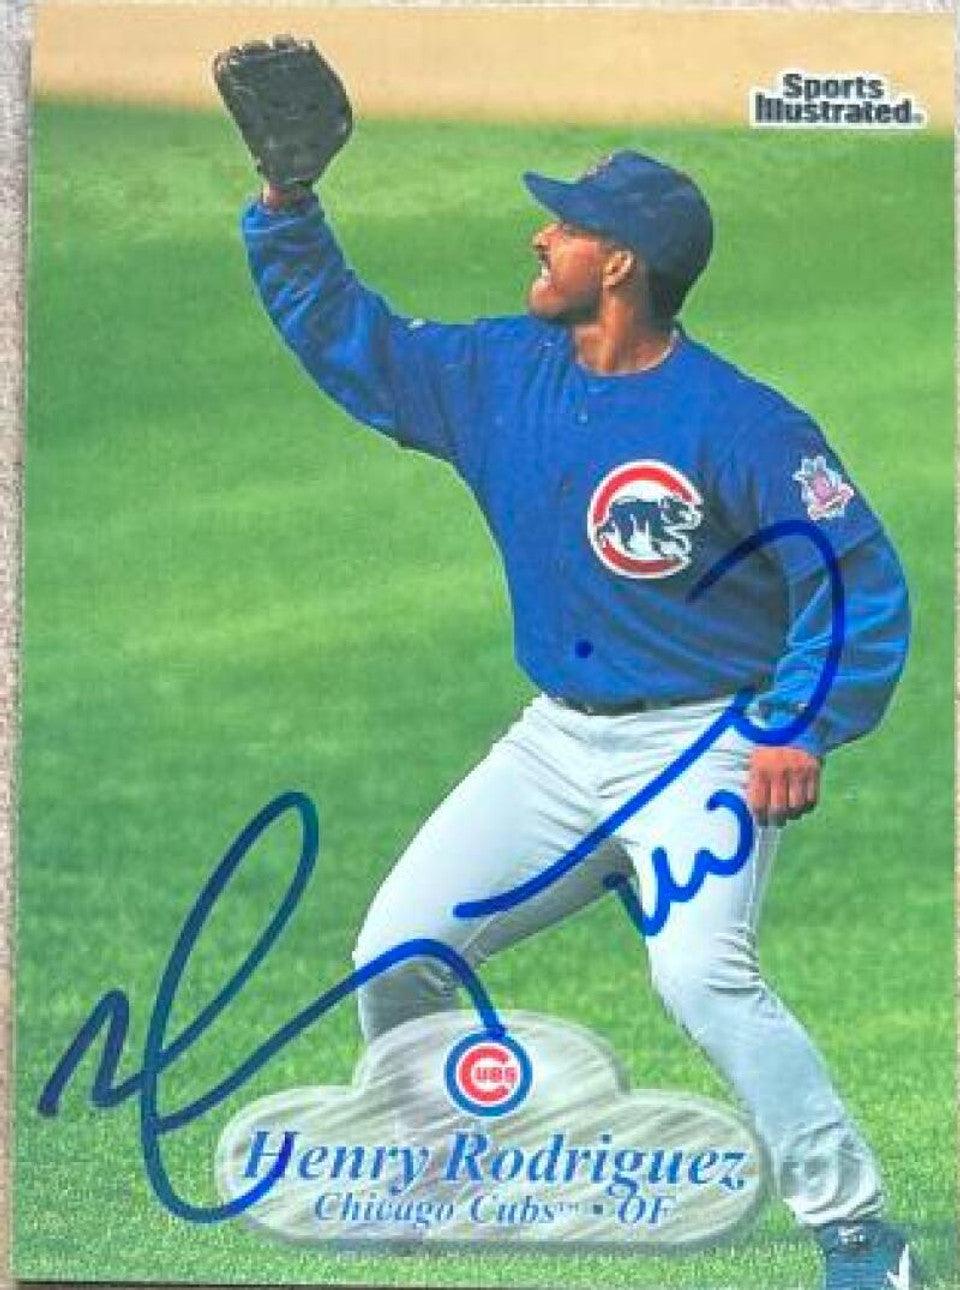 Henry Rodriguez Signed 1998 Sports Illustrated Baseball Card - Chicago Cubs - PastPros